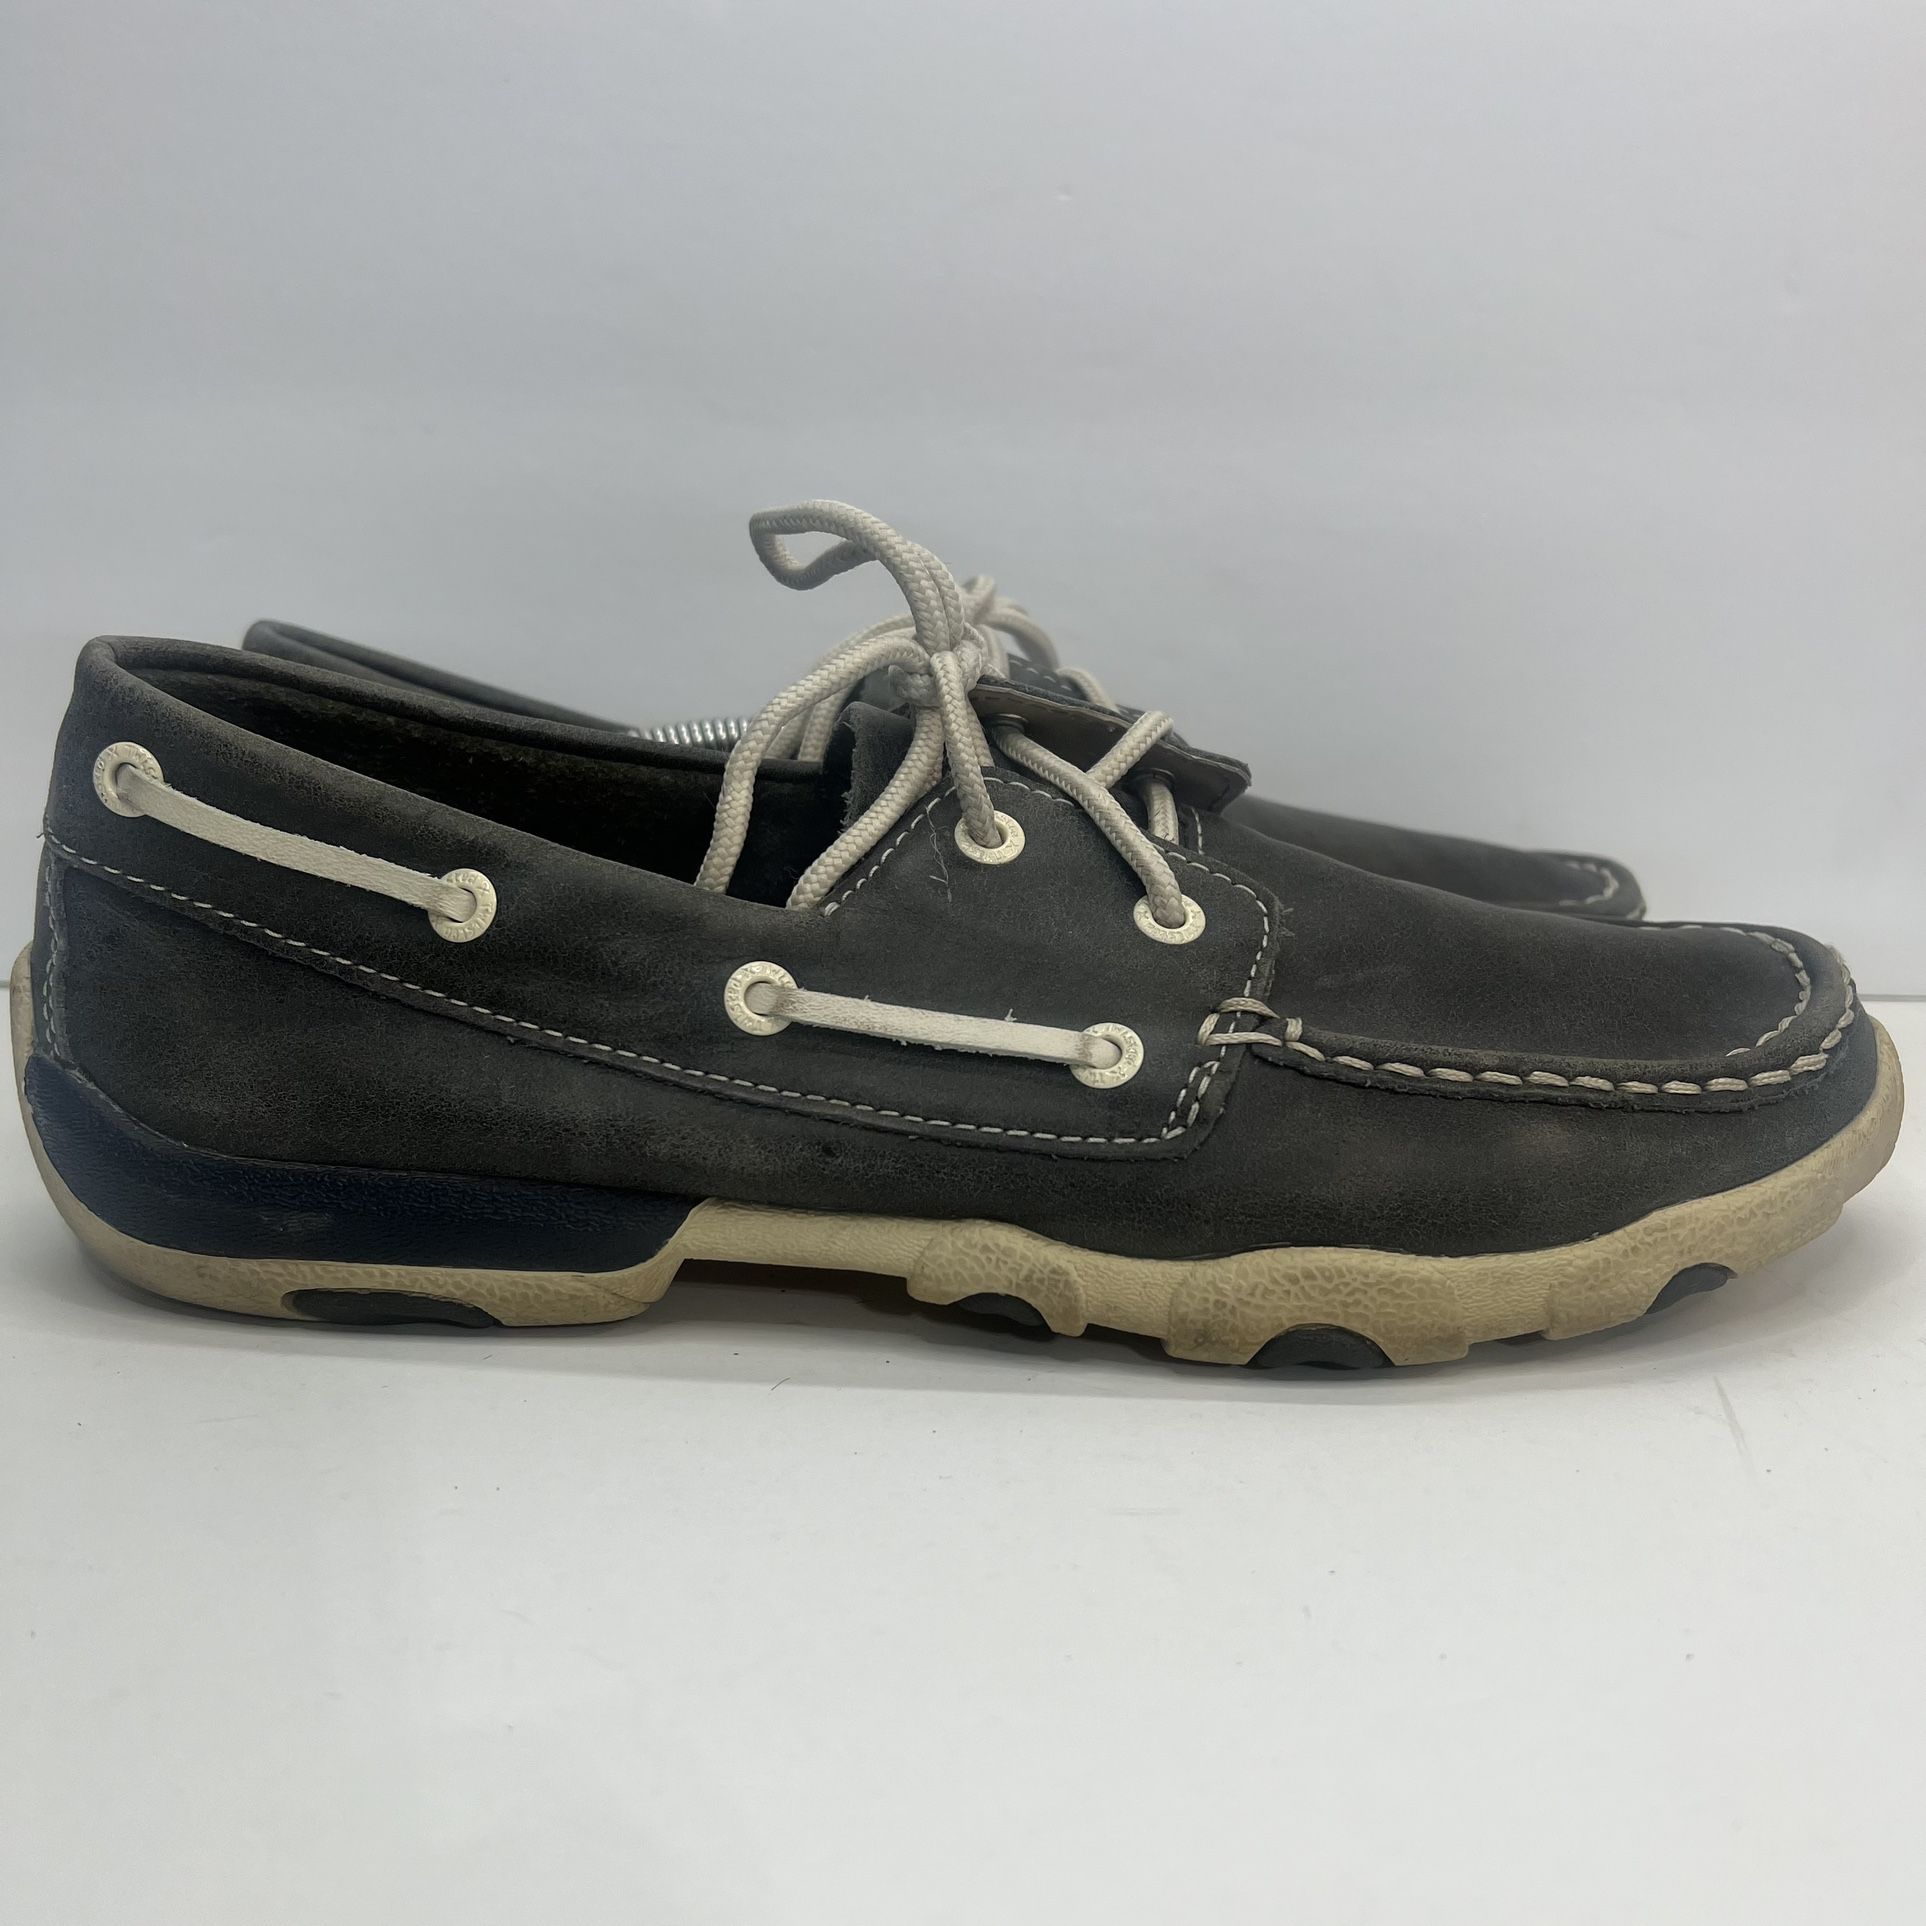 Twisted X Boots Driving Mocs Boat Shoes